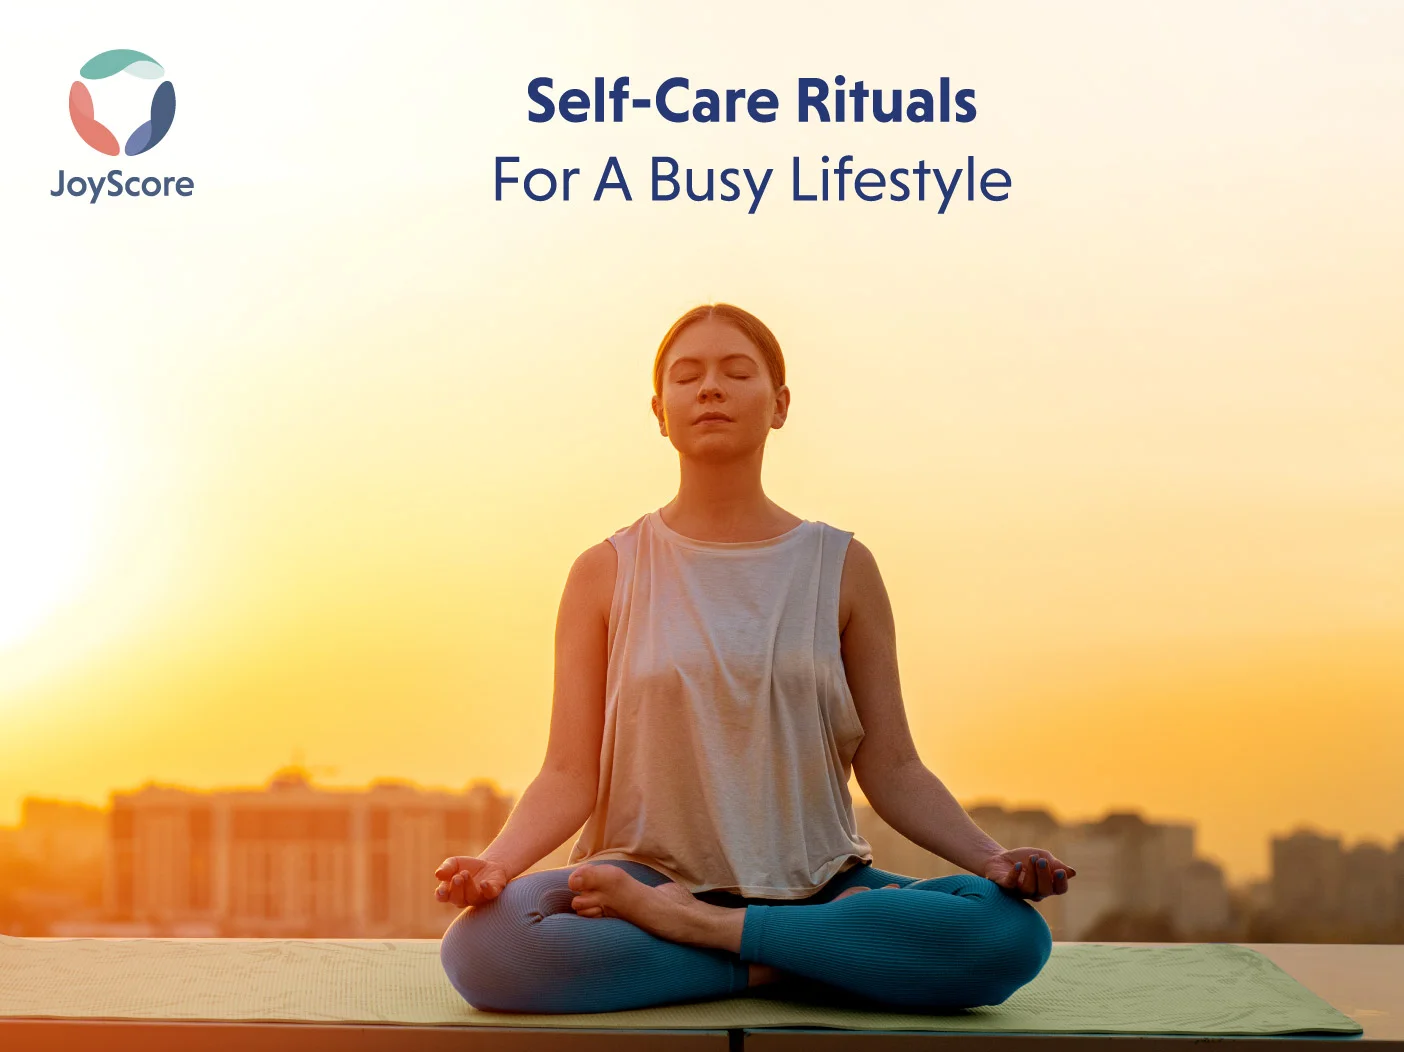 Self-Care Rituals for A Busy Lifestyle